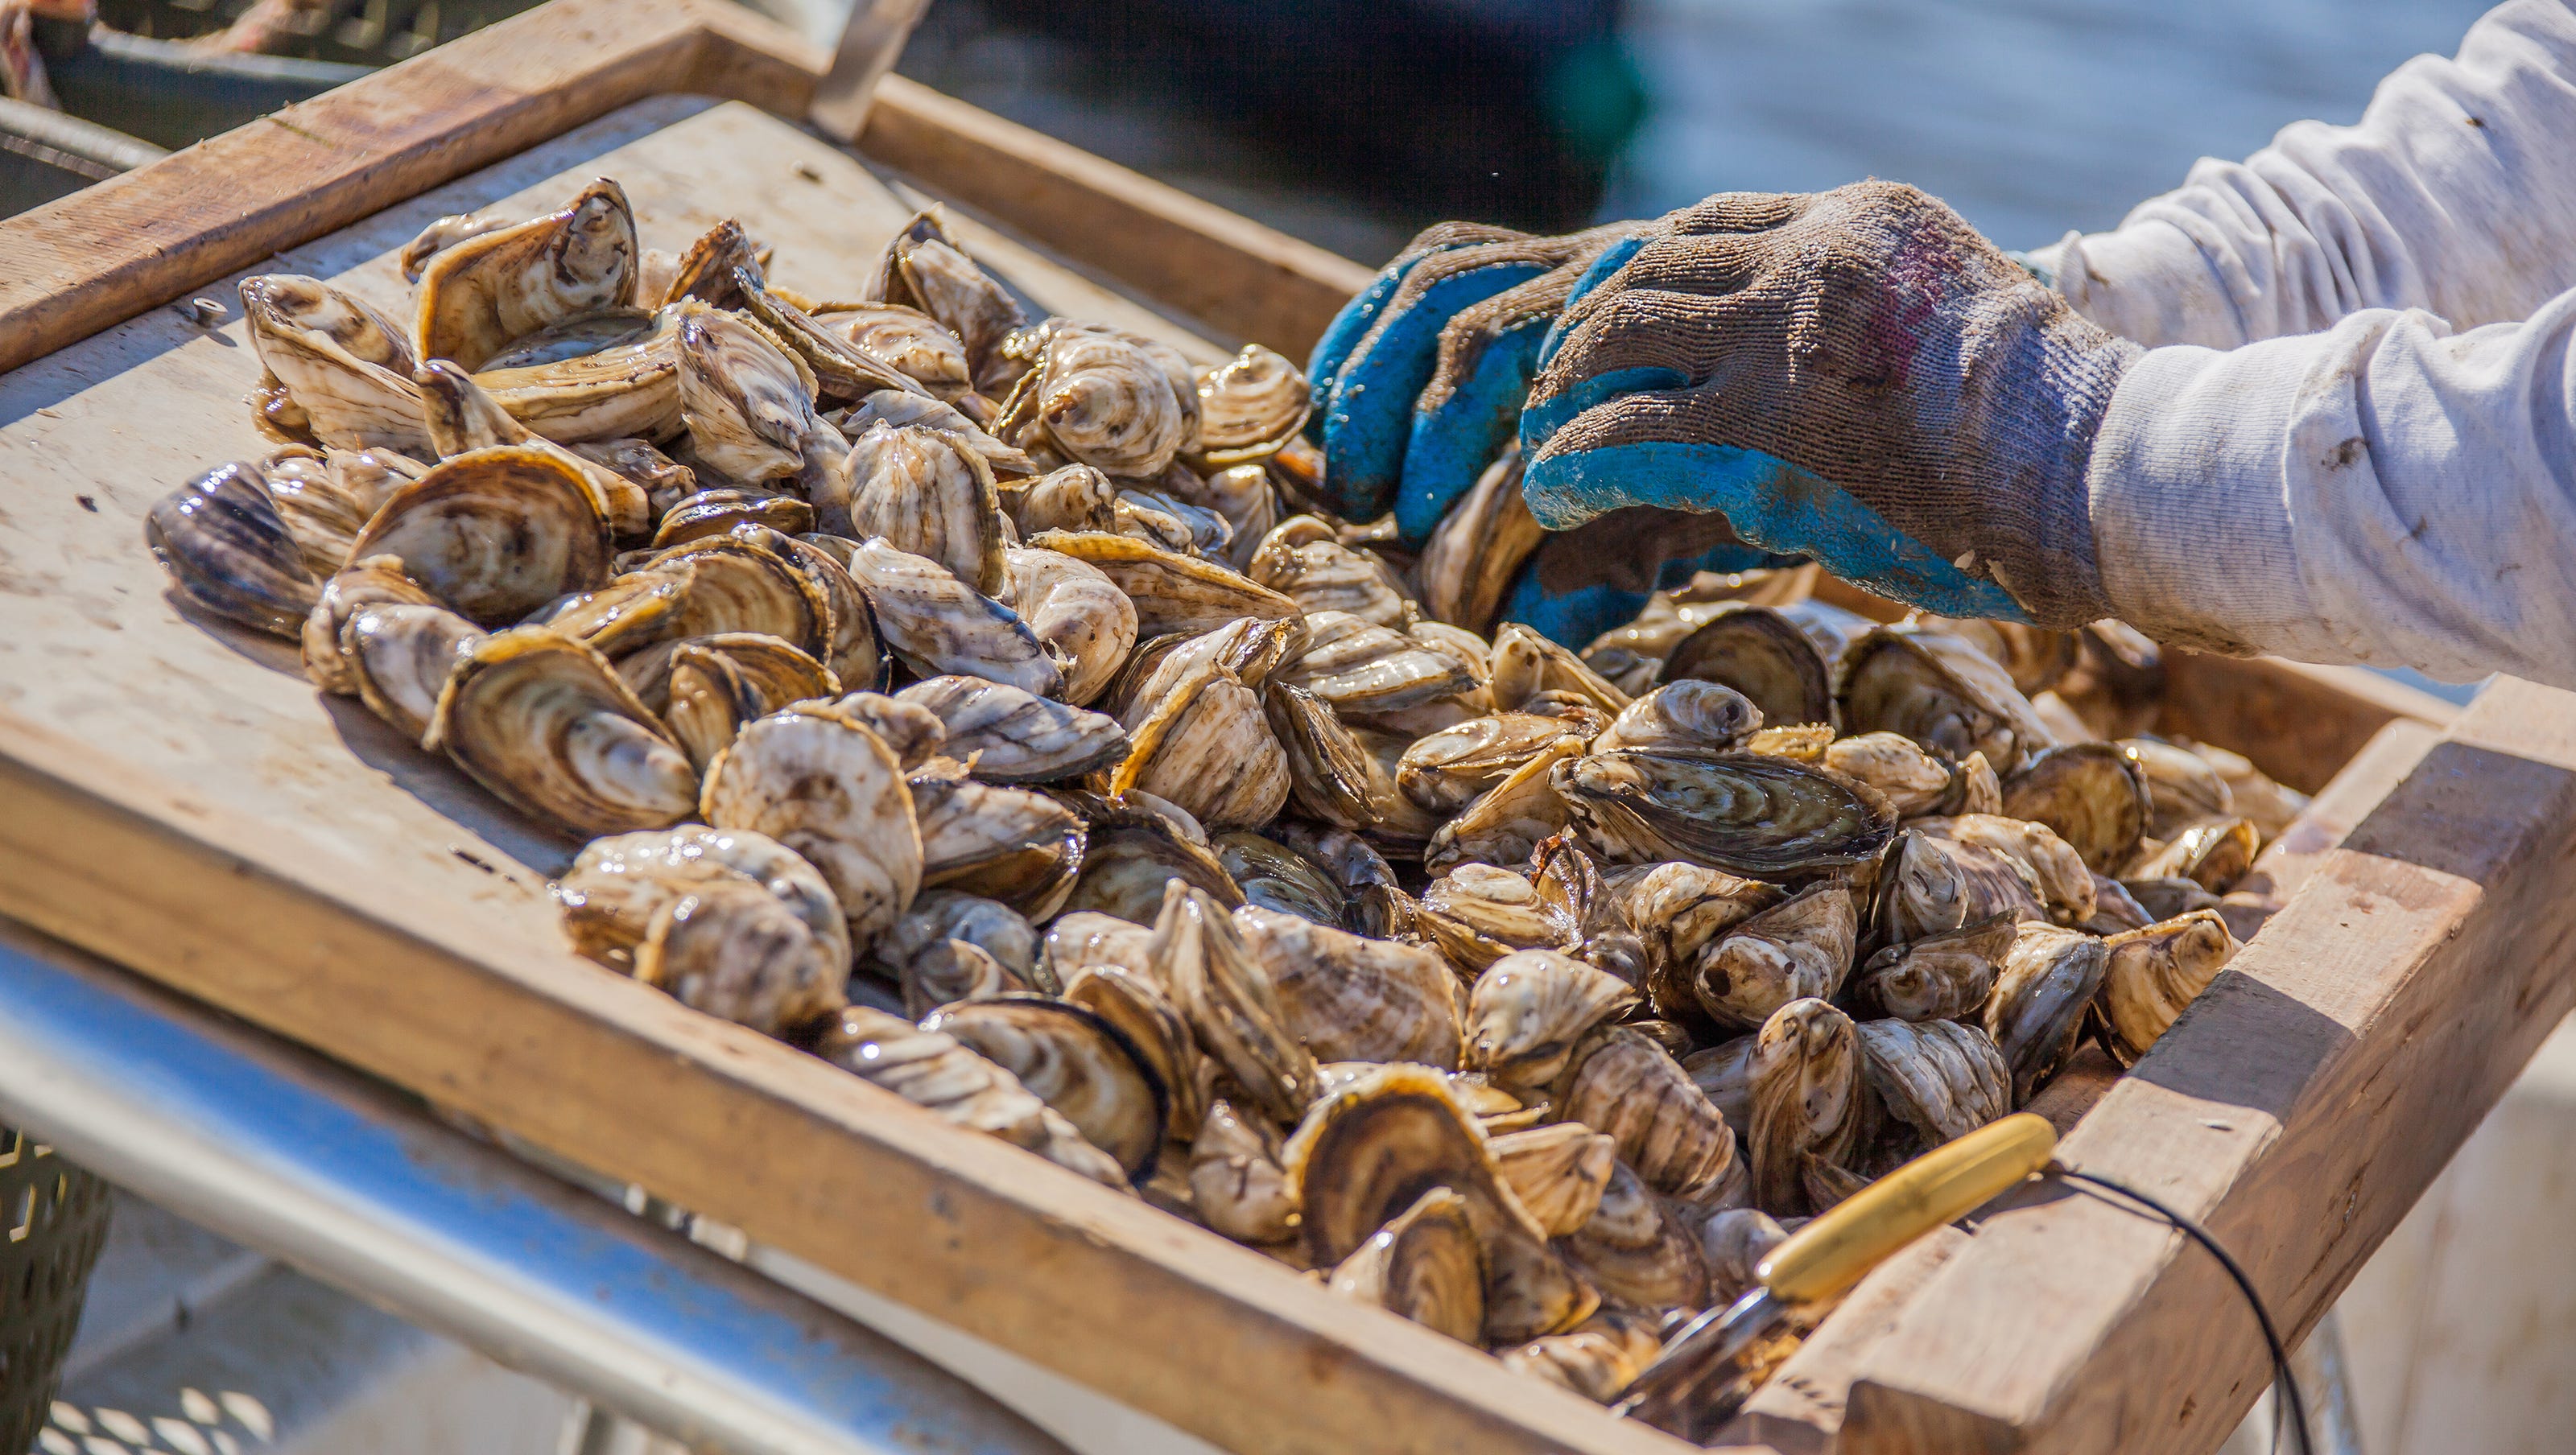 Pensacola Bay's Oyster Company theft: How FWC tracked down alleged culprits